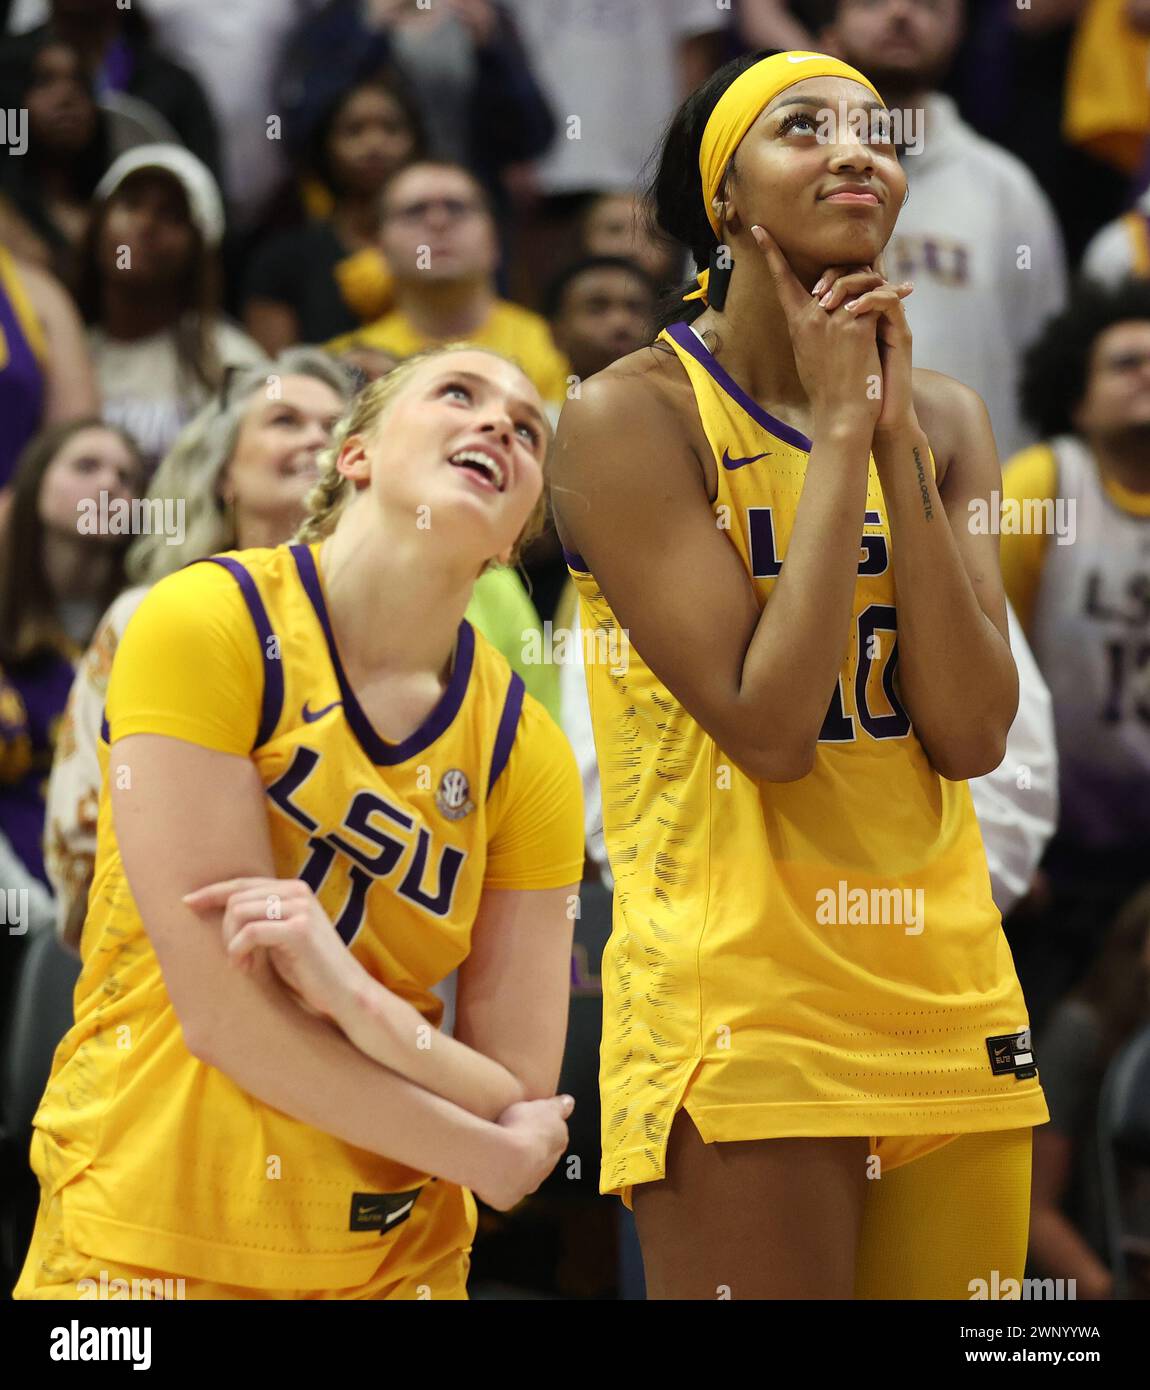 Baton Rouge, USA. 03rd Mar, 2024. LSU Lady Tigers guard Hailey Van Lith (11) and forward Angel Reese (10) both watch a video tribute of themselves on Senior Night in the conclusion of a Southeastern Conference women's college basketball game at Pete Maravich Assembly Center in Baton Rouge, Louisiana on Sunday, March 3, 2023. (Photo by Peter G. Forest/Sipa USA) Credit: Sipa USA/Alamy Live News Stock Photo